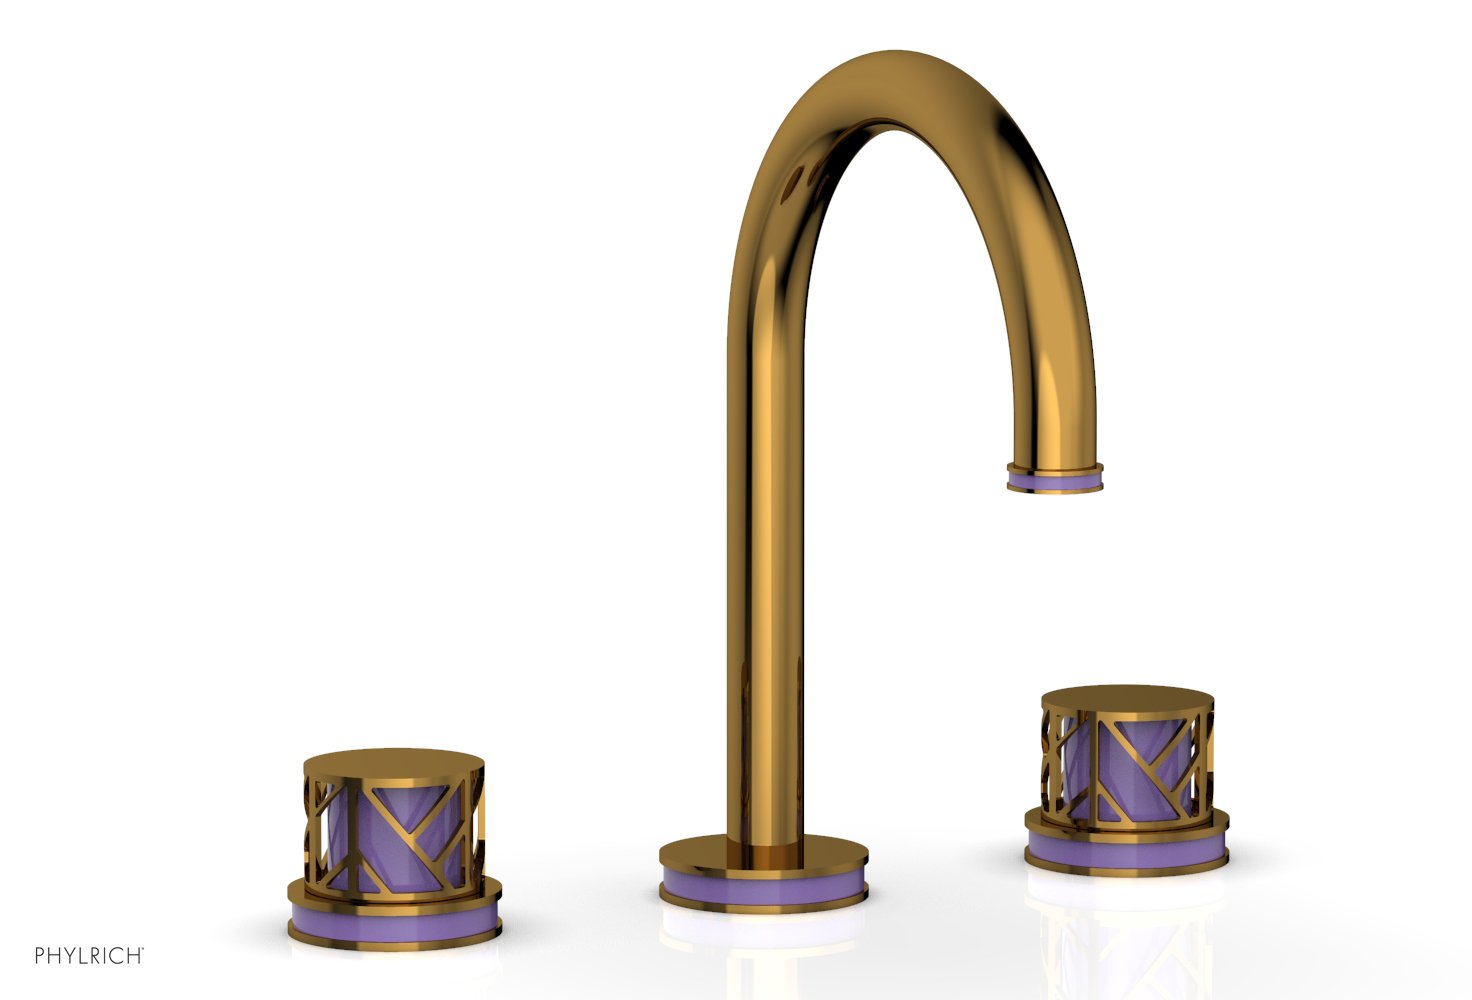 Phylrich JOLIE Widespread Faucet - Round Handles with "Purple" Accents